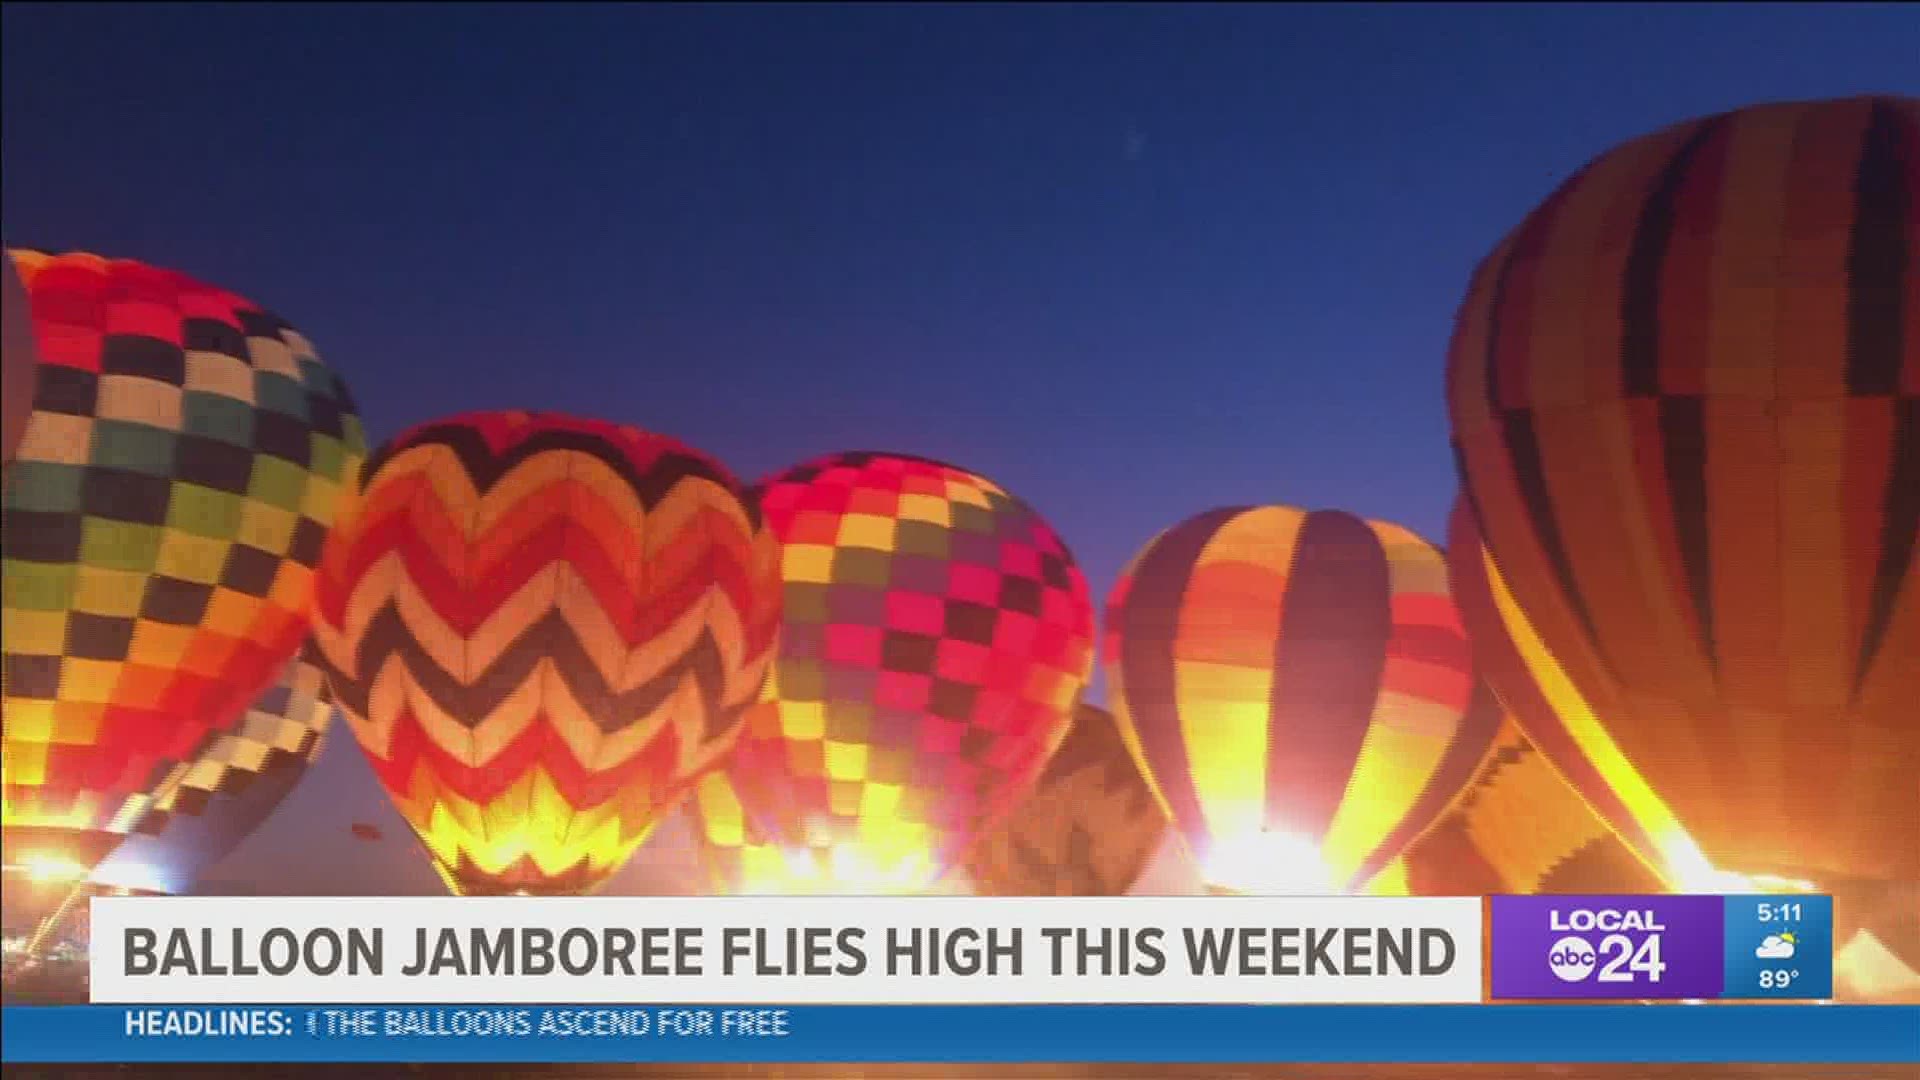 25 hot air balloons will take to the sky in Collierville this weekend.